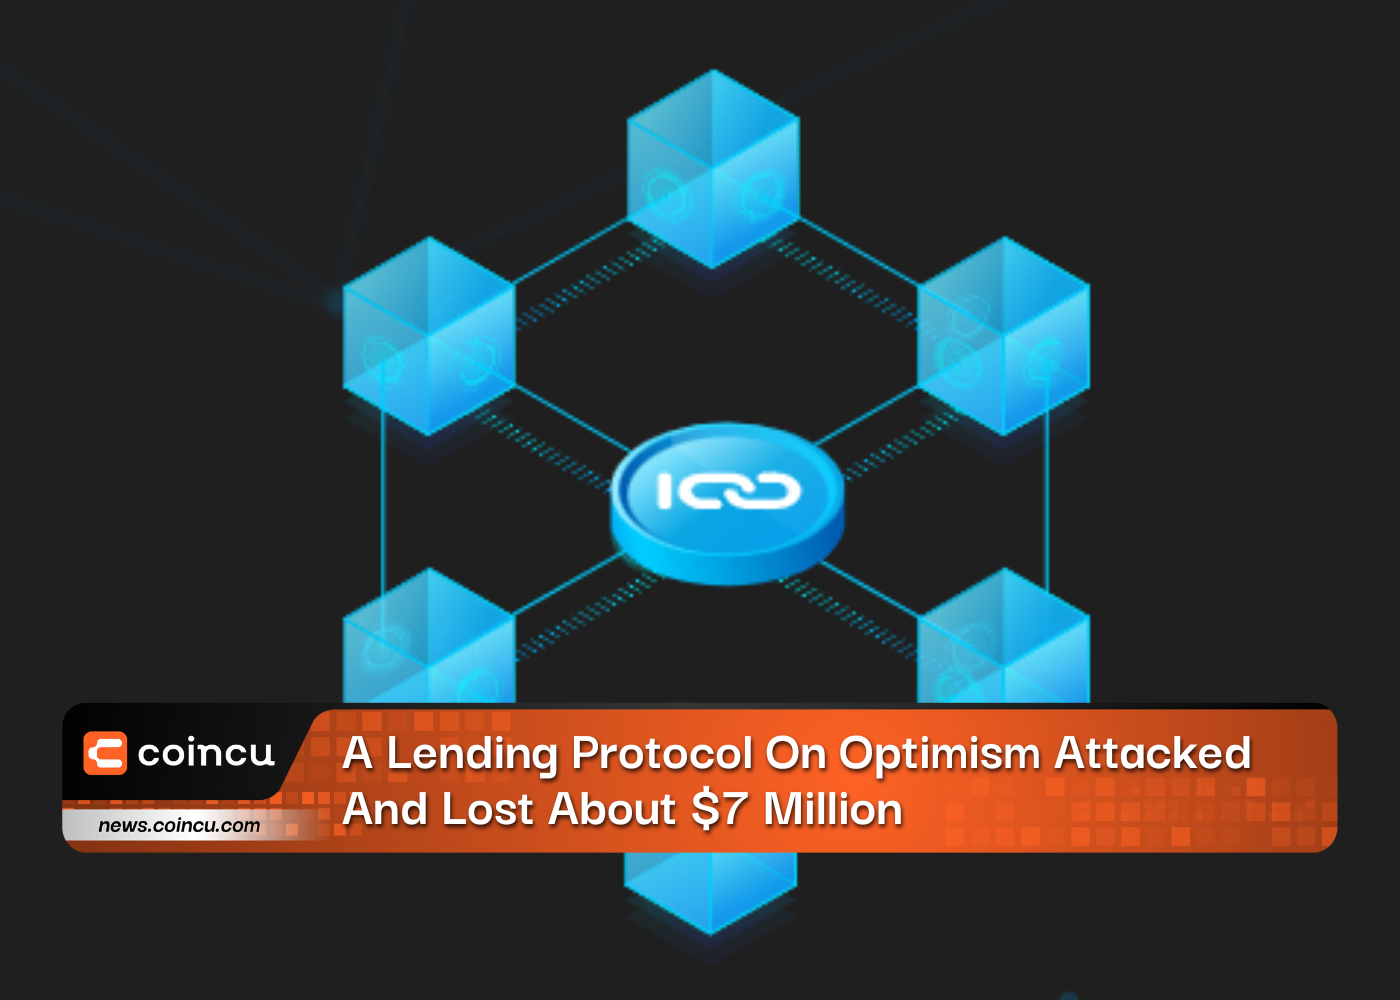 A Lending Protocol On Optimism Attacked And Lost About $7 Million